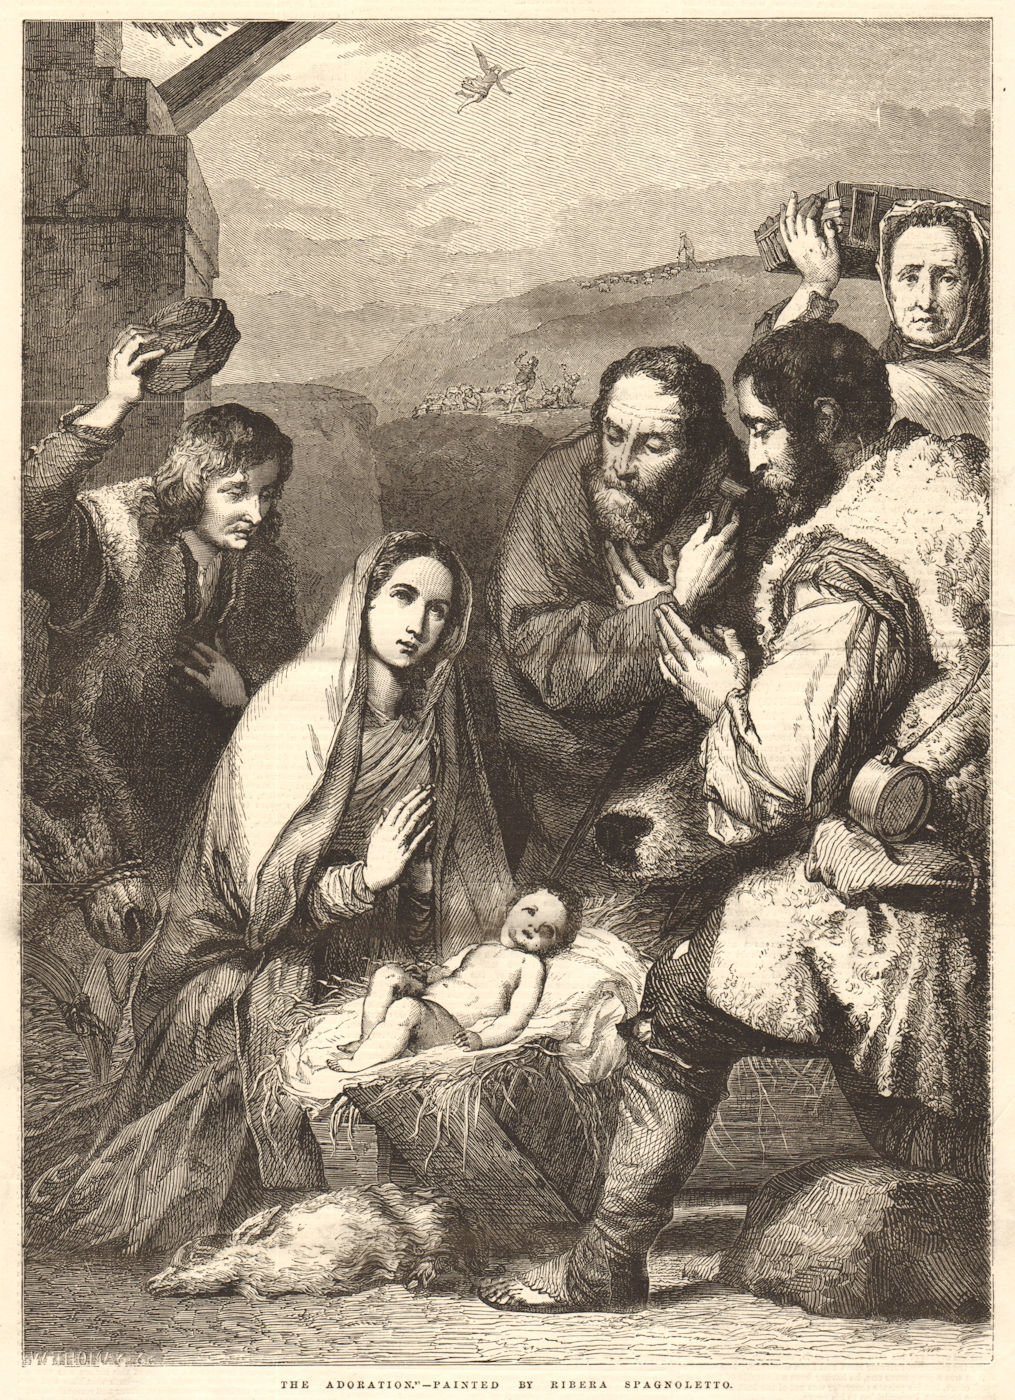 The Adoration - painted by Ribera Spagnoletto. Religious. Fine Arts 1856 print